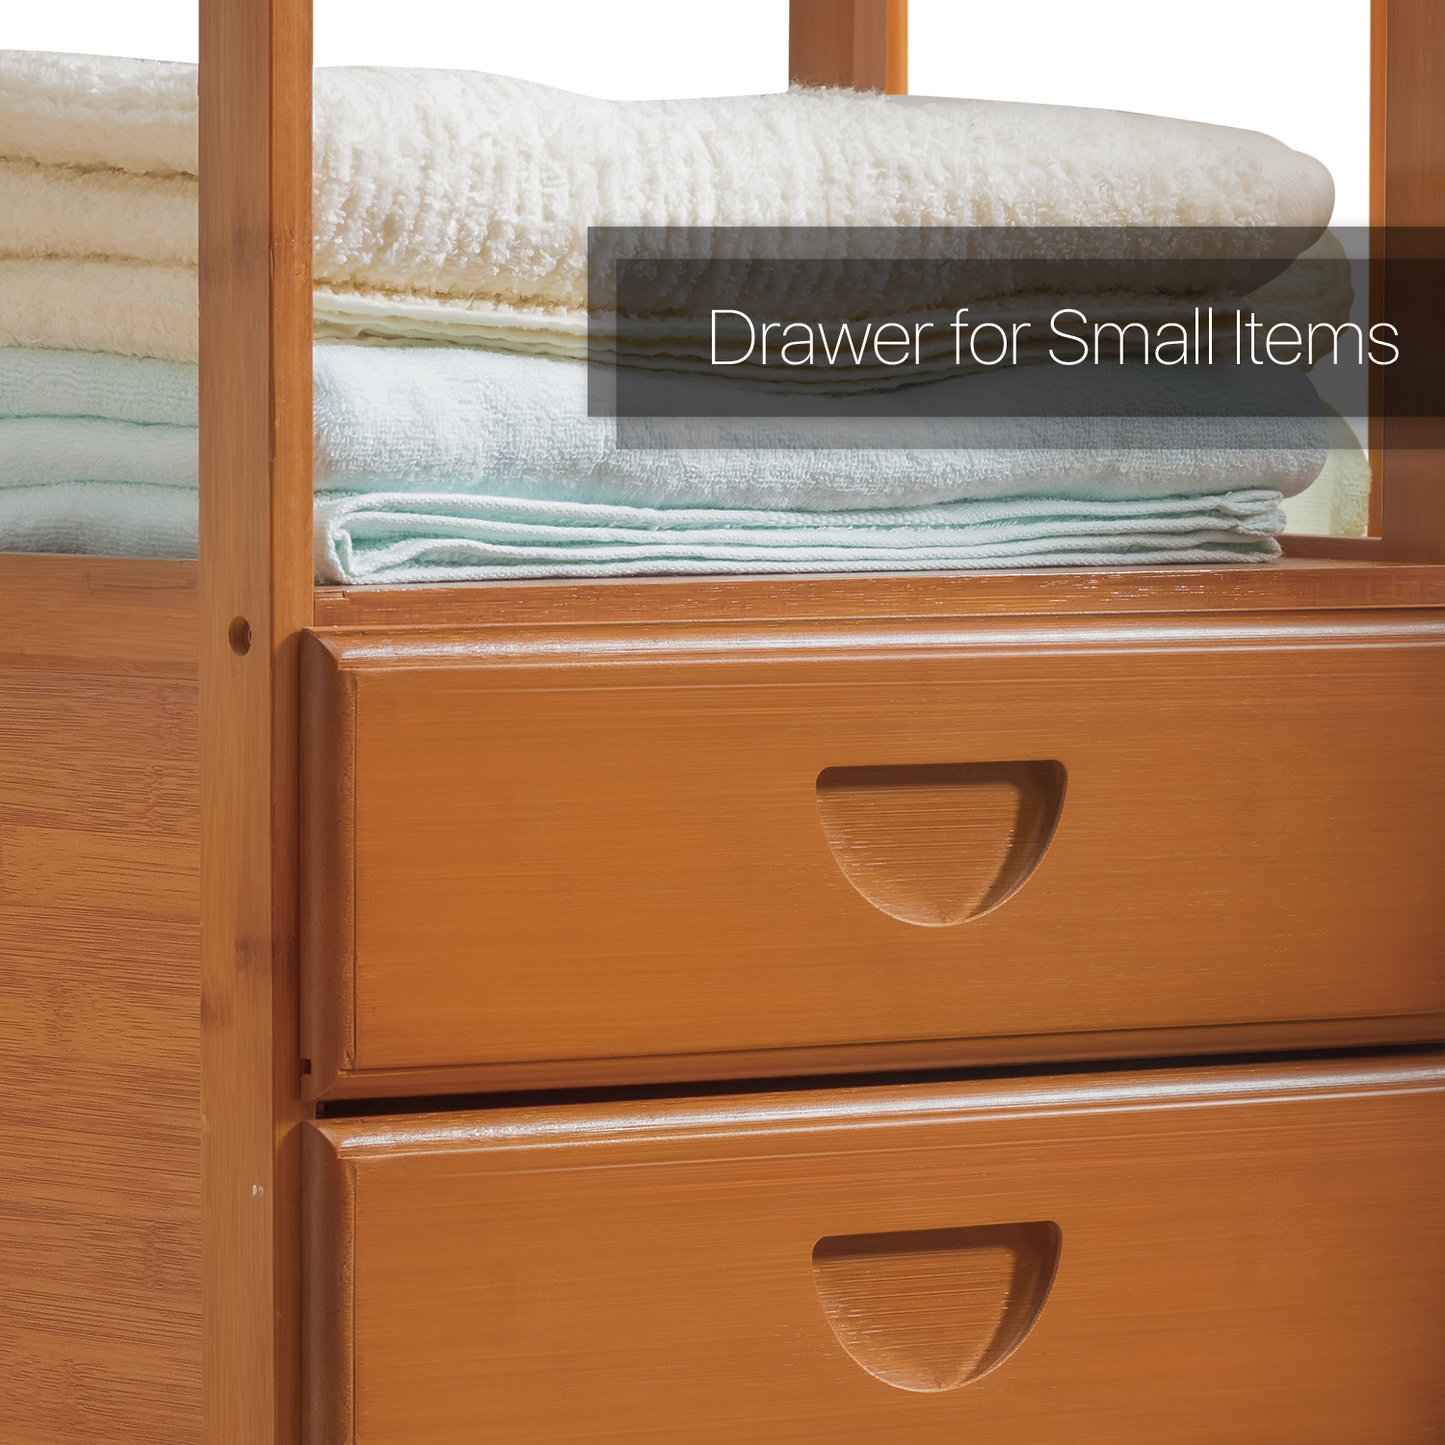 Double Drawer Garment Hanging Stand - with Pants Rack - Brown